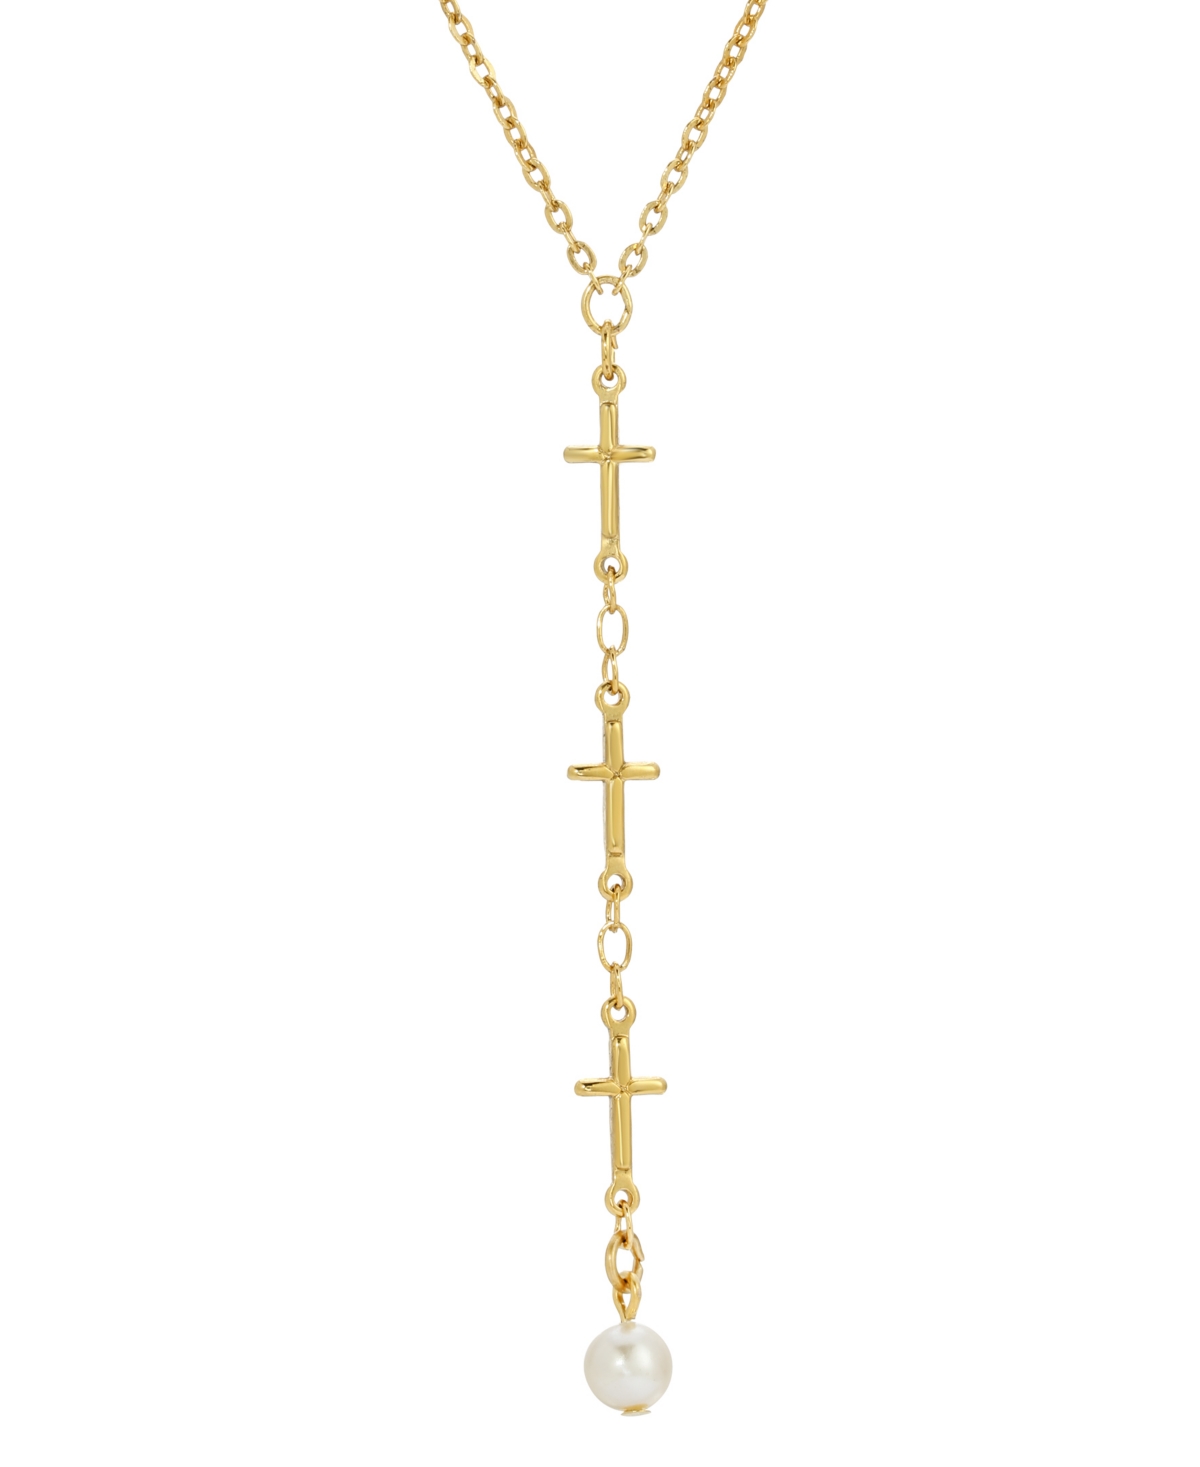 14K Gold Dipped Triple Cross Drop Imitation Pearl Necklace - White